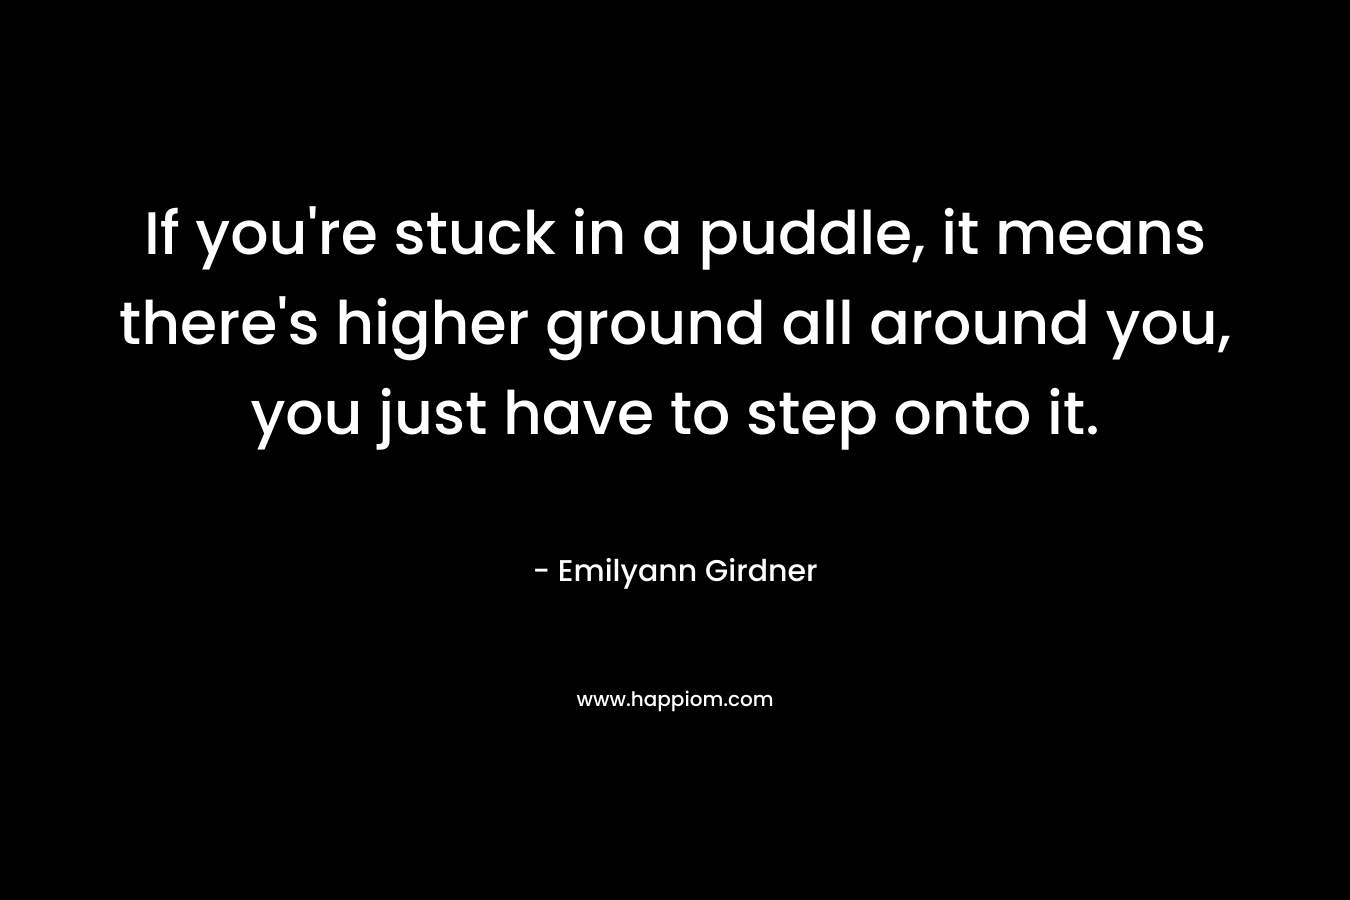 If you’re stuck in a puddle, it means there’s higher ground all around you, you just have to step onto it. – Emilyann Girdner